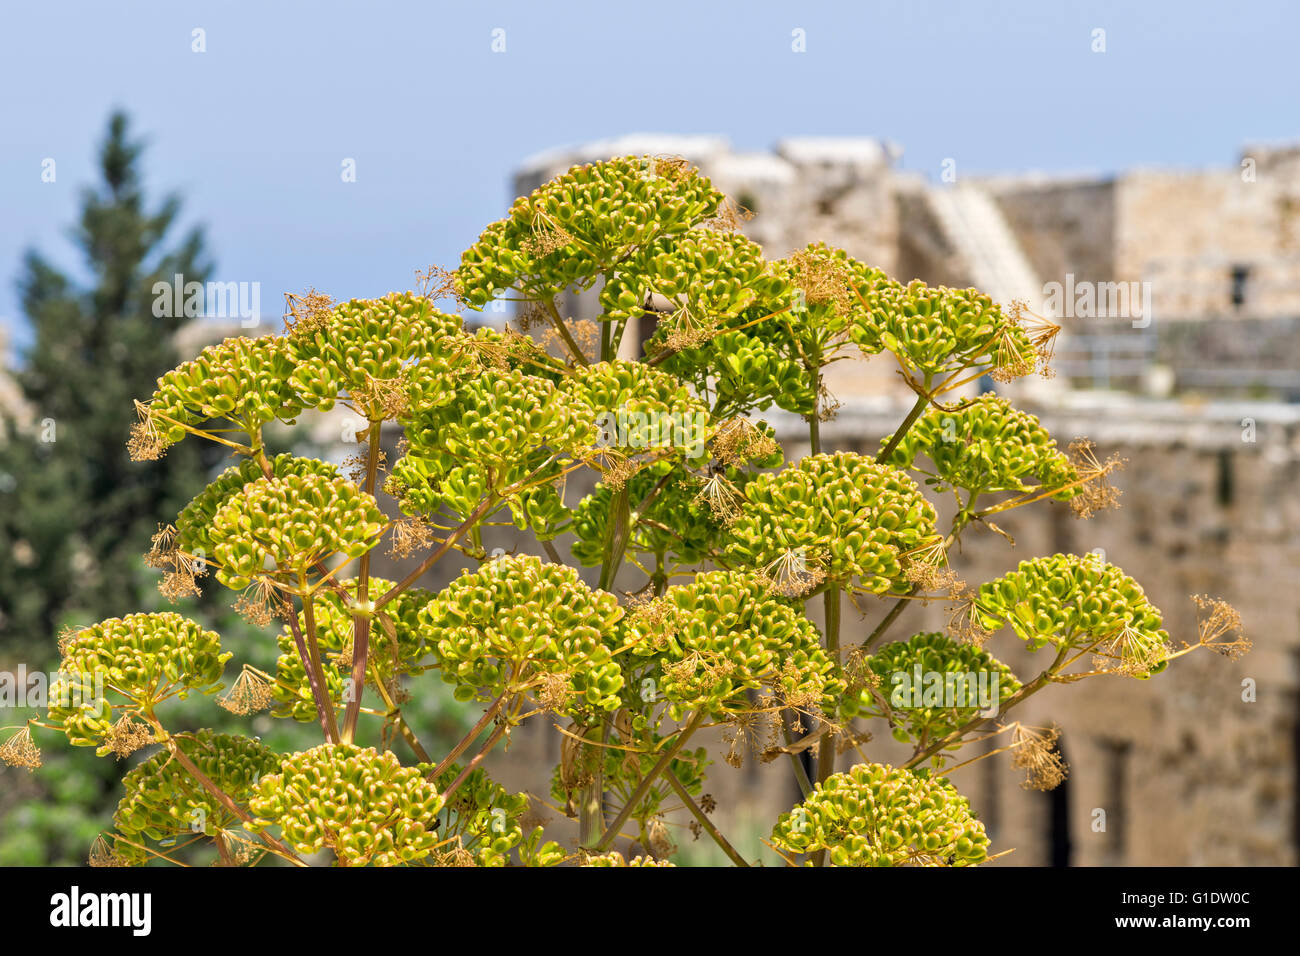 NORTH CYPRUS WILD FENNEL WITH SEED HEADS GROWING IN KYRENIA CASTLE Stock Photo